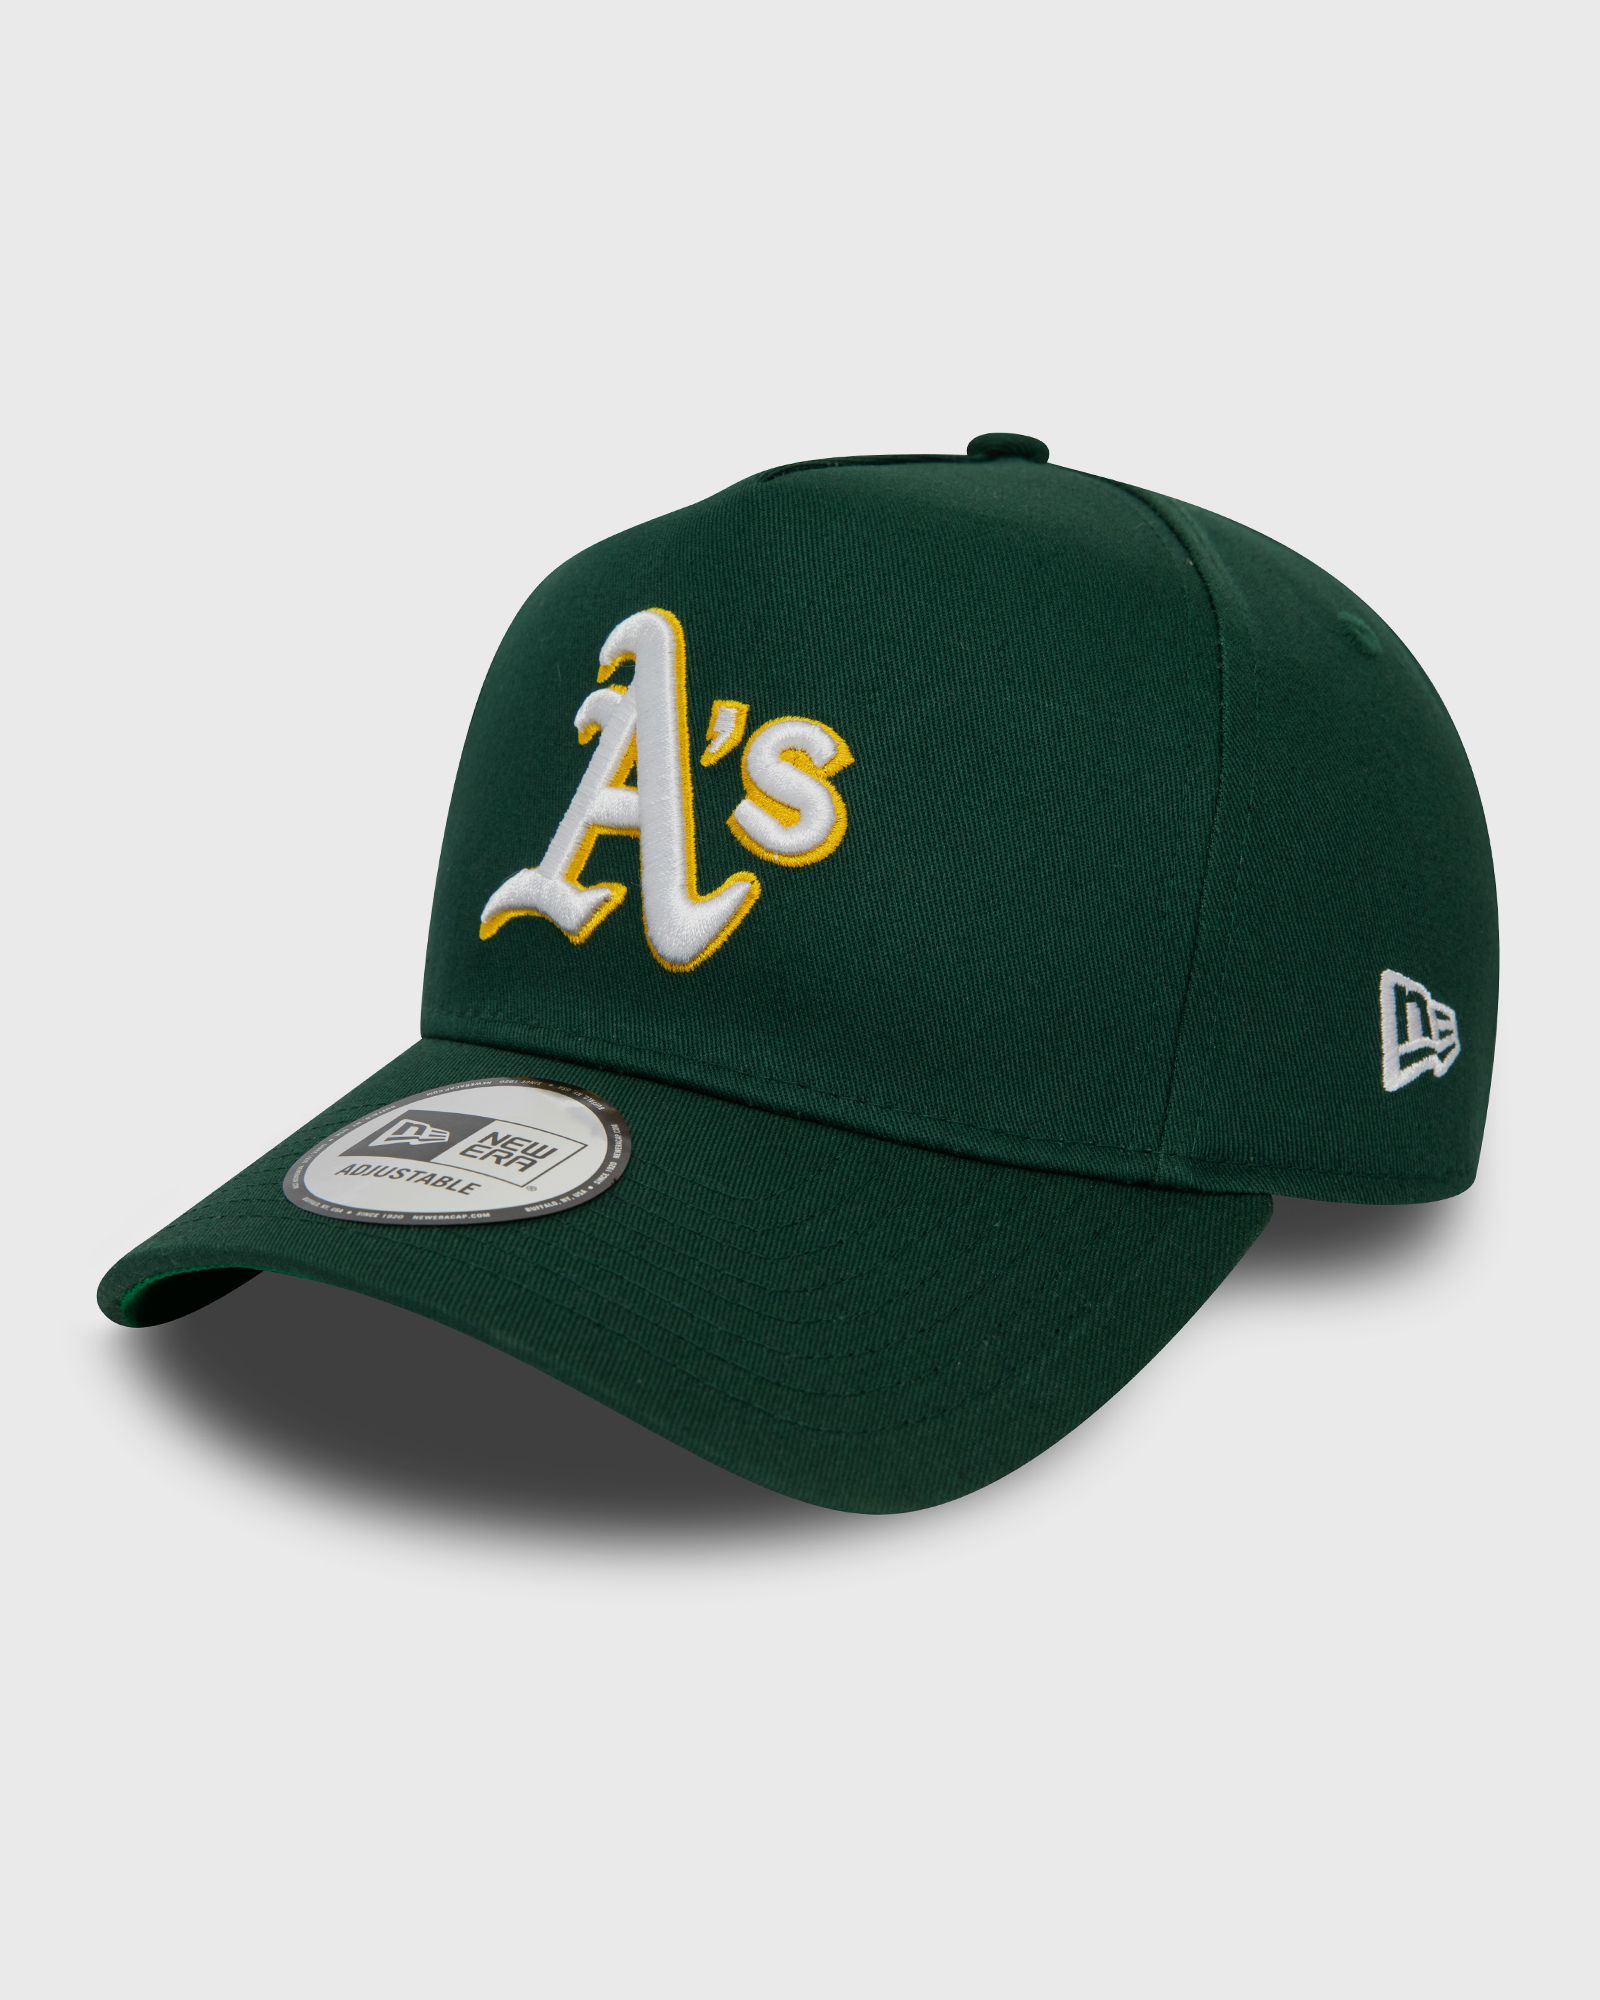 New Era - patch 9forty ef oakland atheletics men caps green in größe:one size